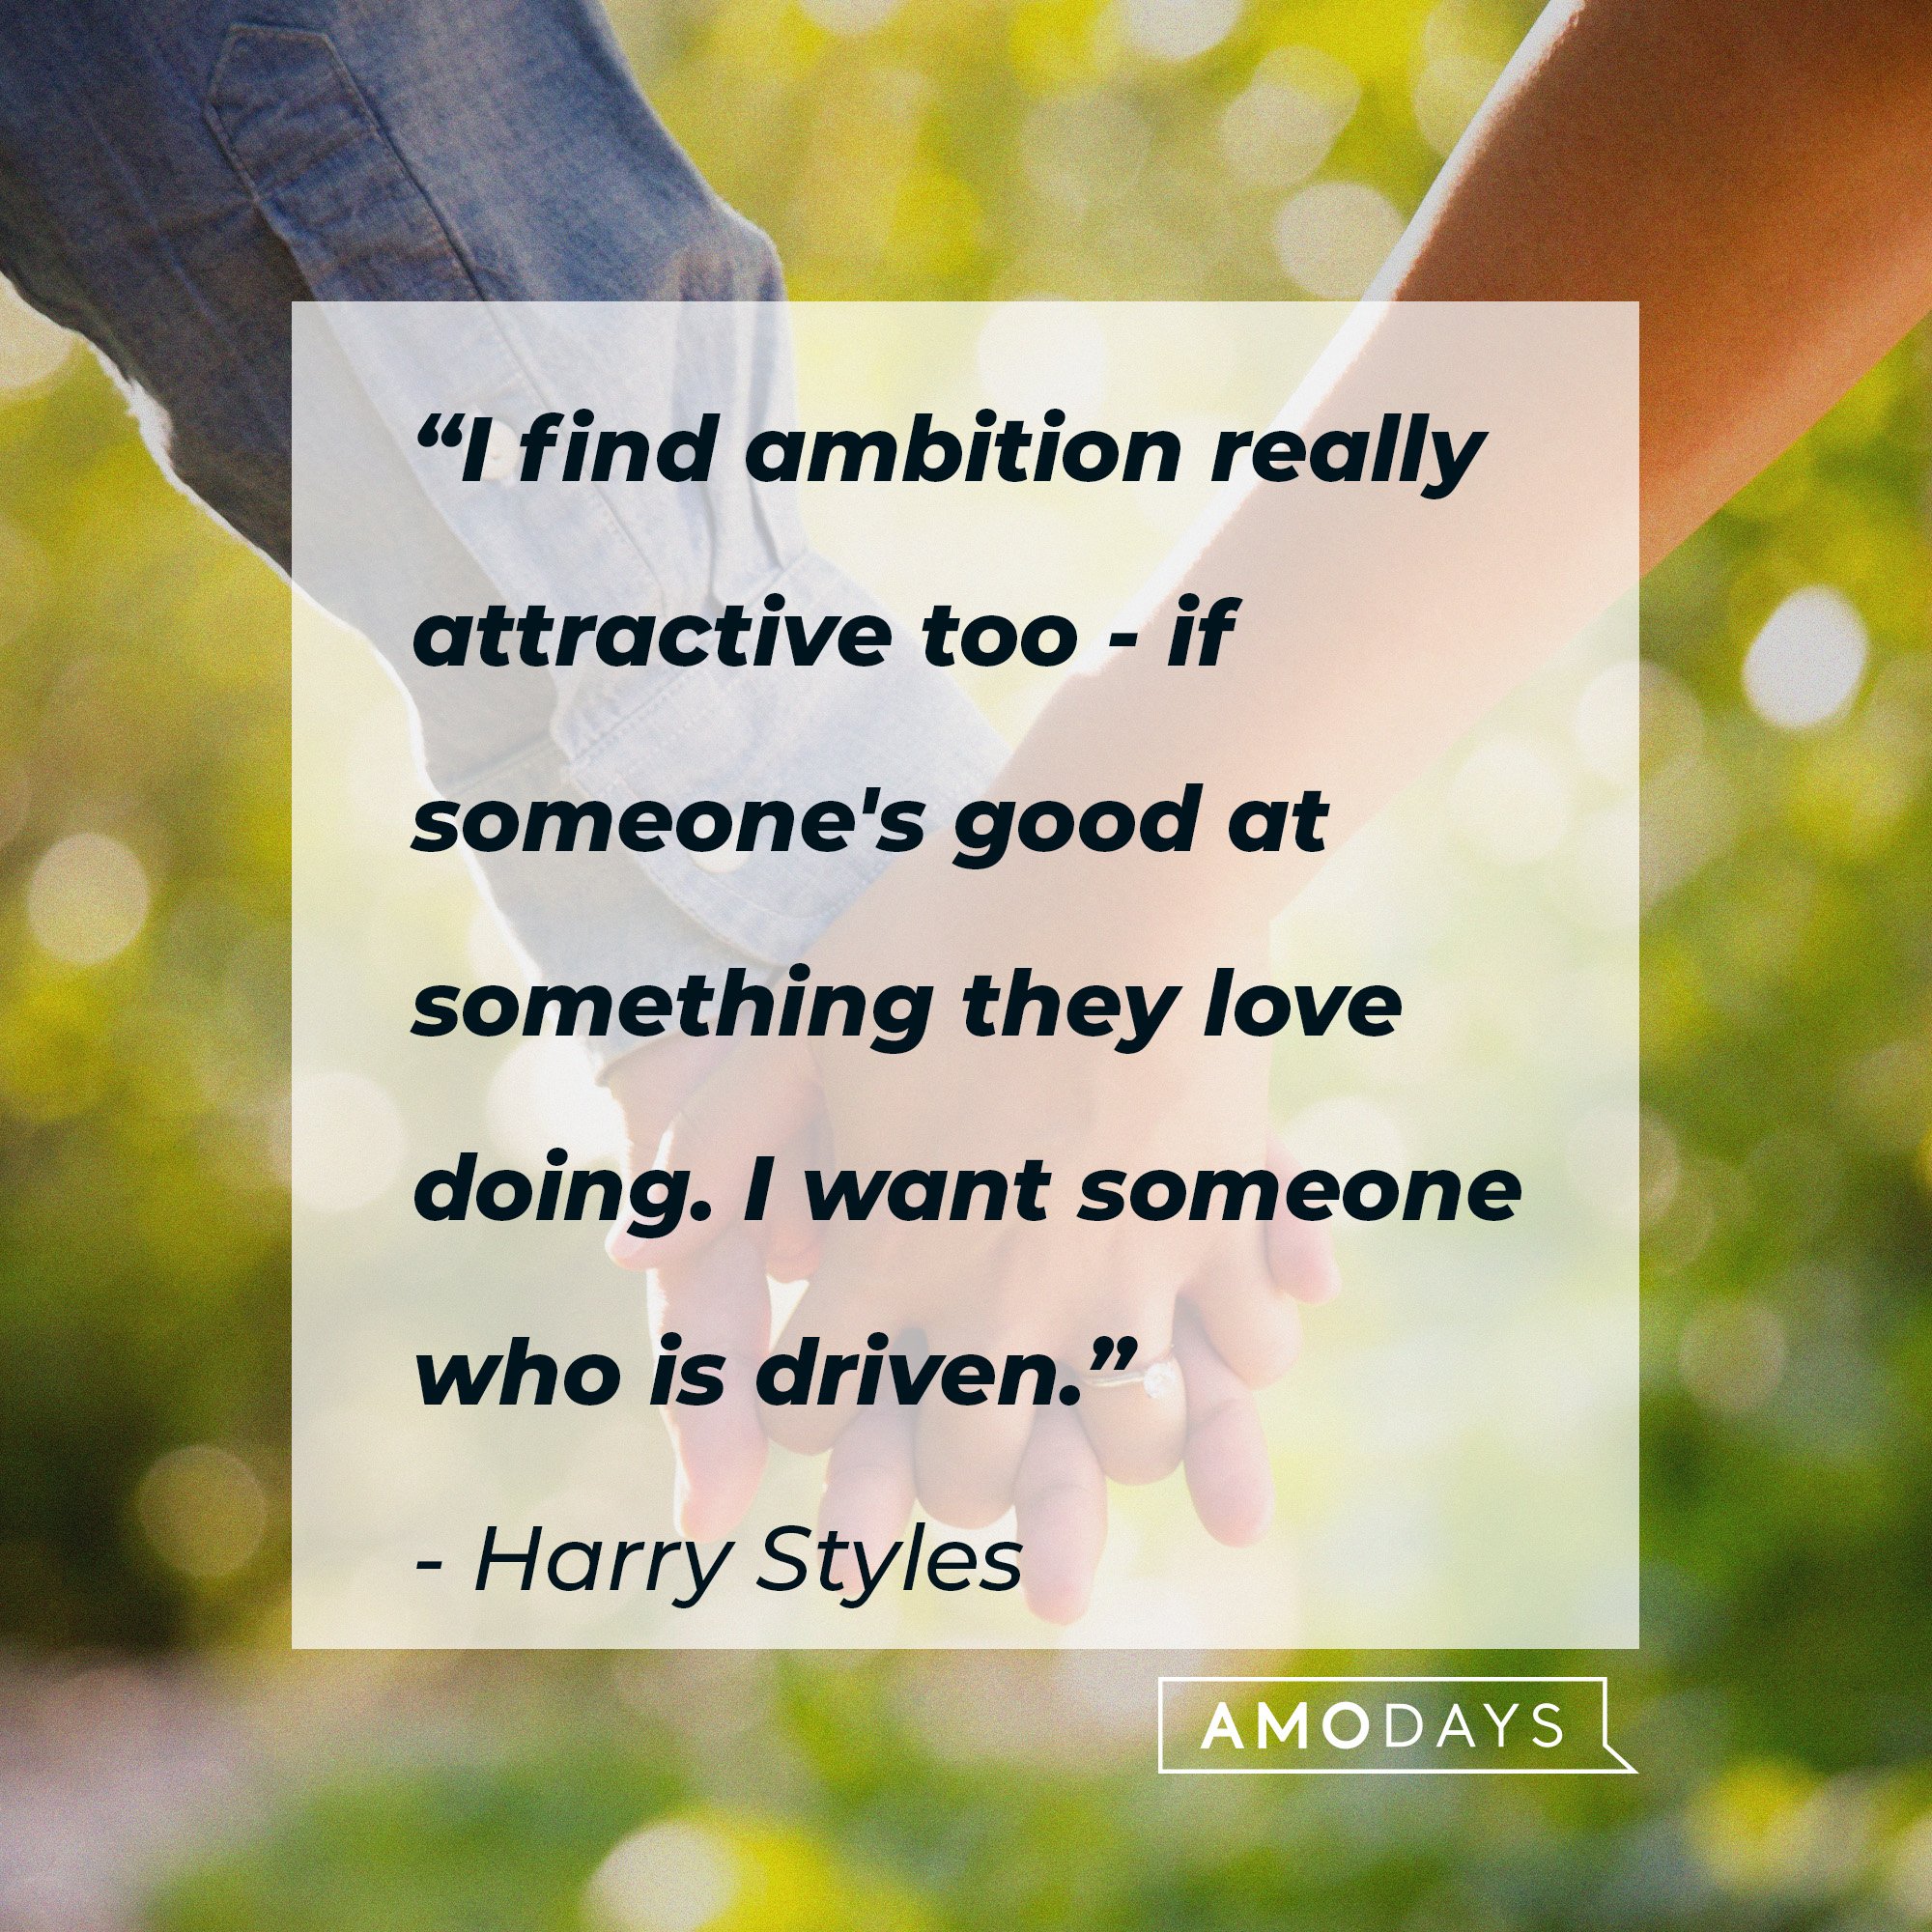 Harry Styles’ quote: “I find ambition really attractive too - if someone's good at something they love doing. I want someone who is driven.” |  Source: AmoDays